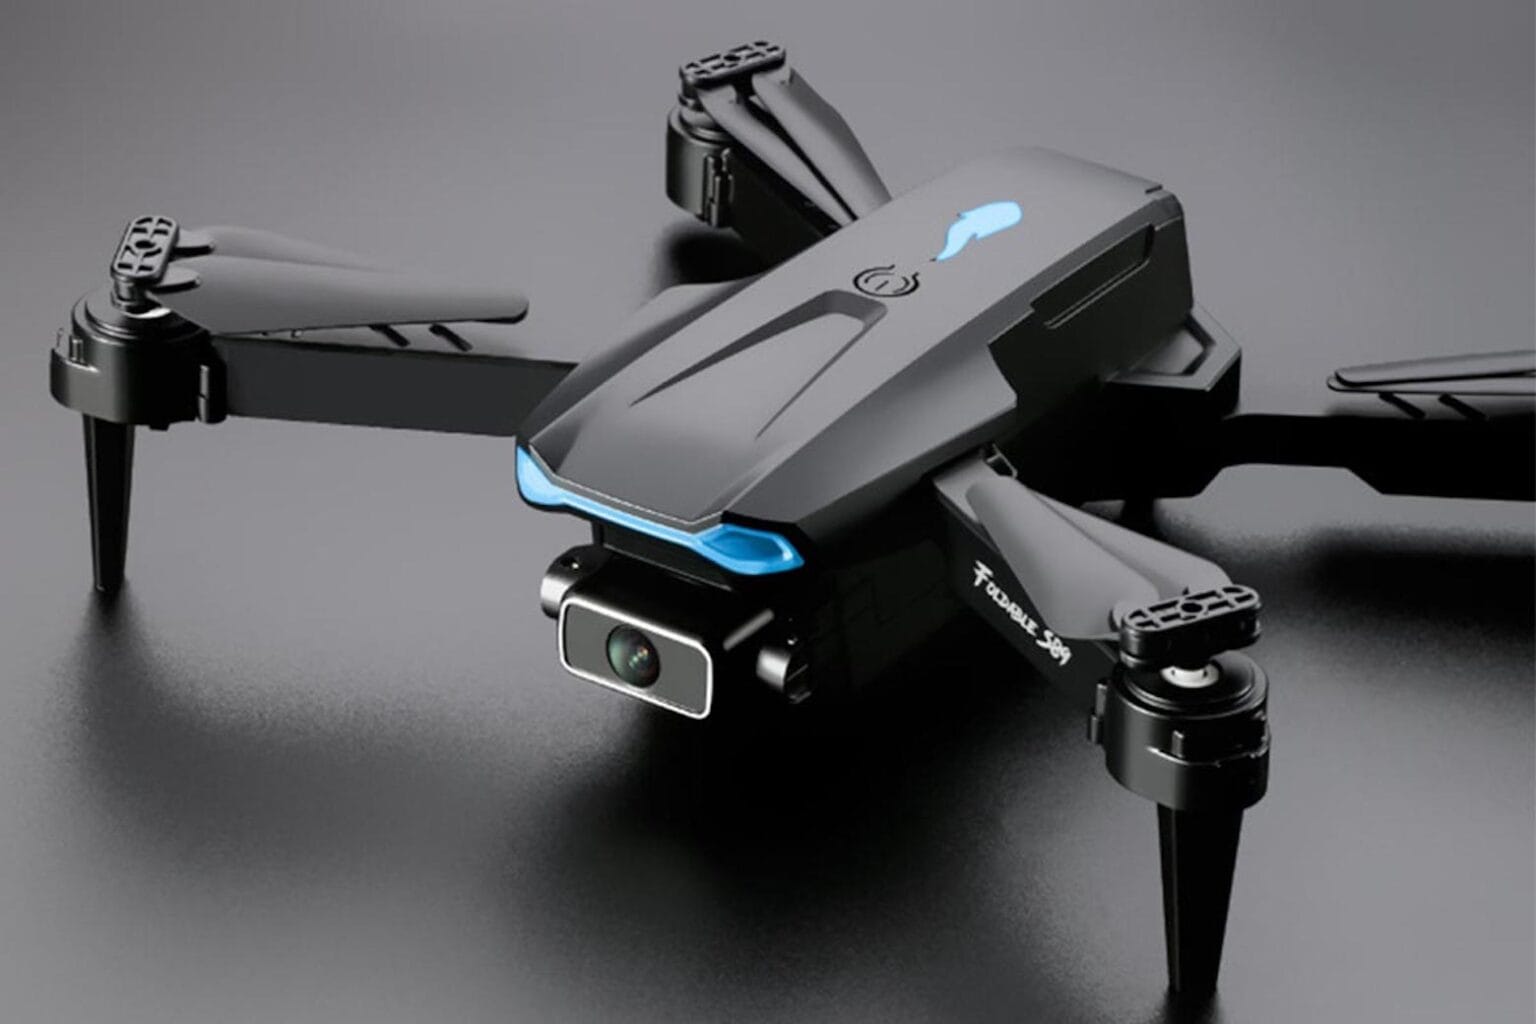 Take flight and take pictures with this high-quality drone.